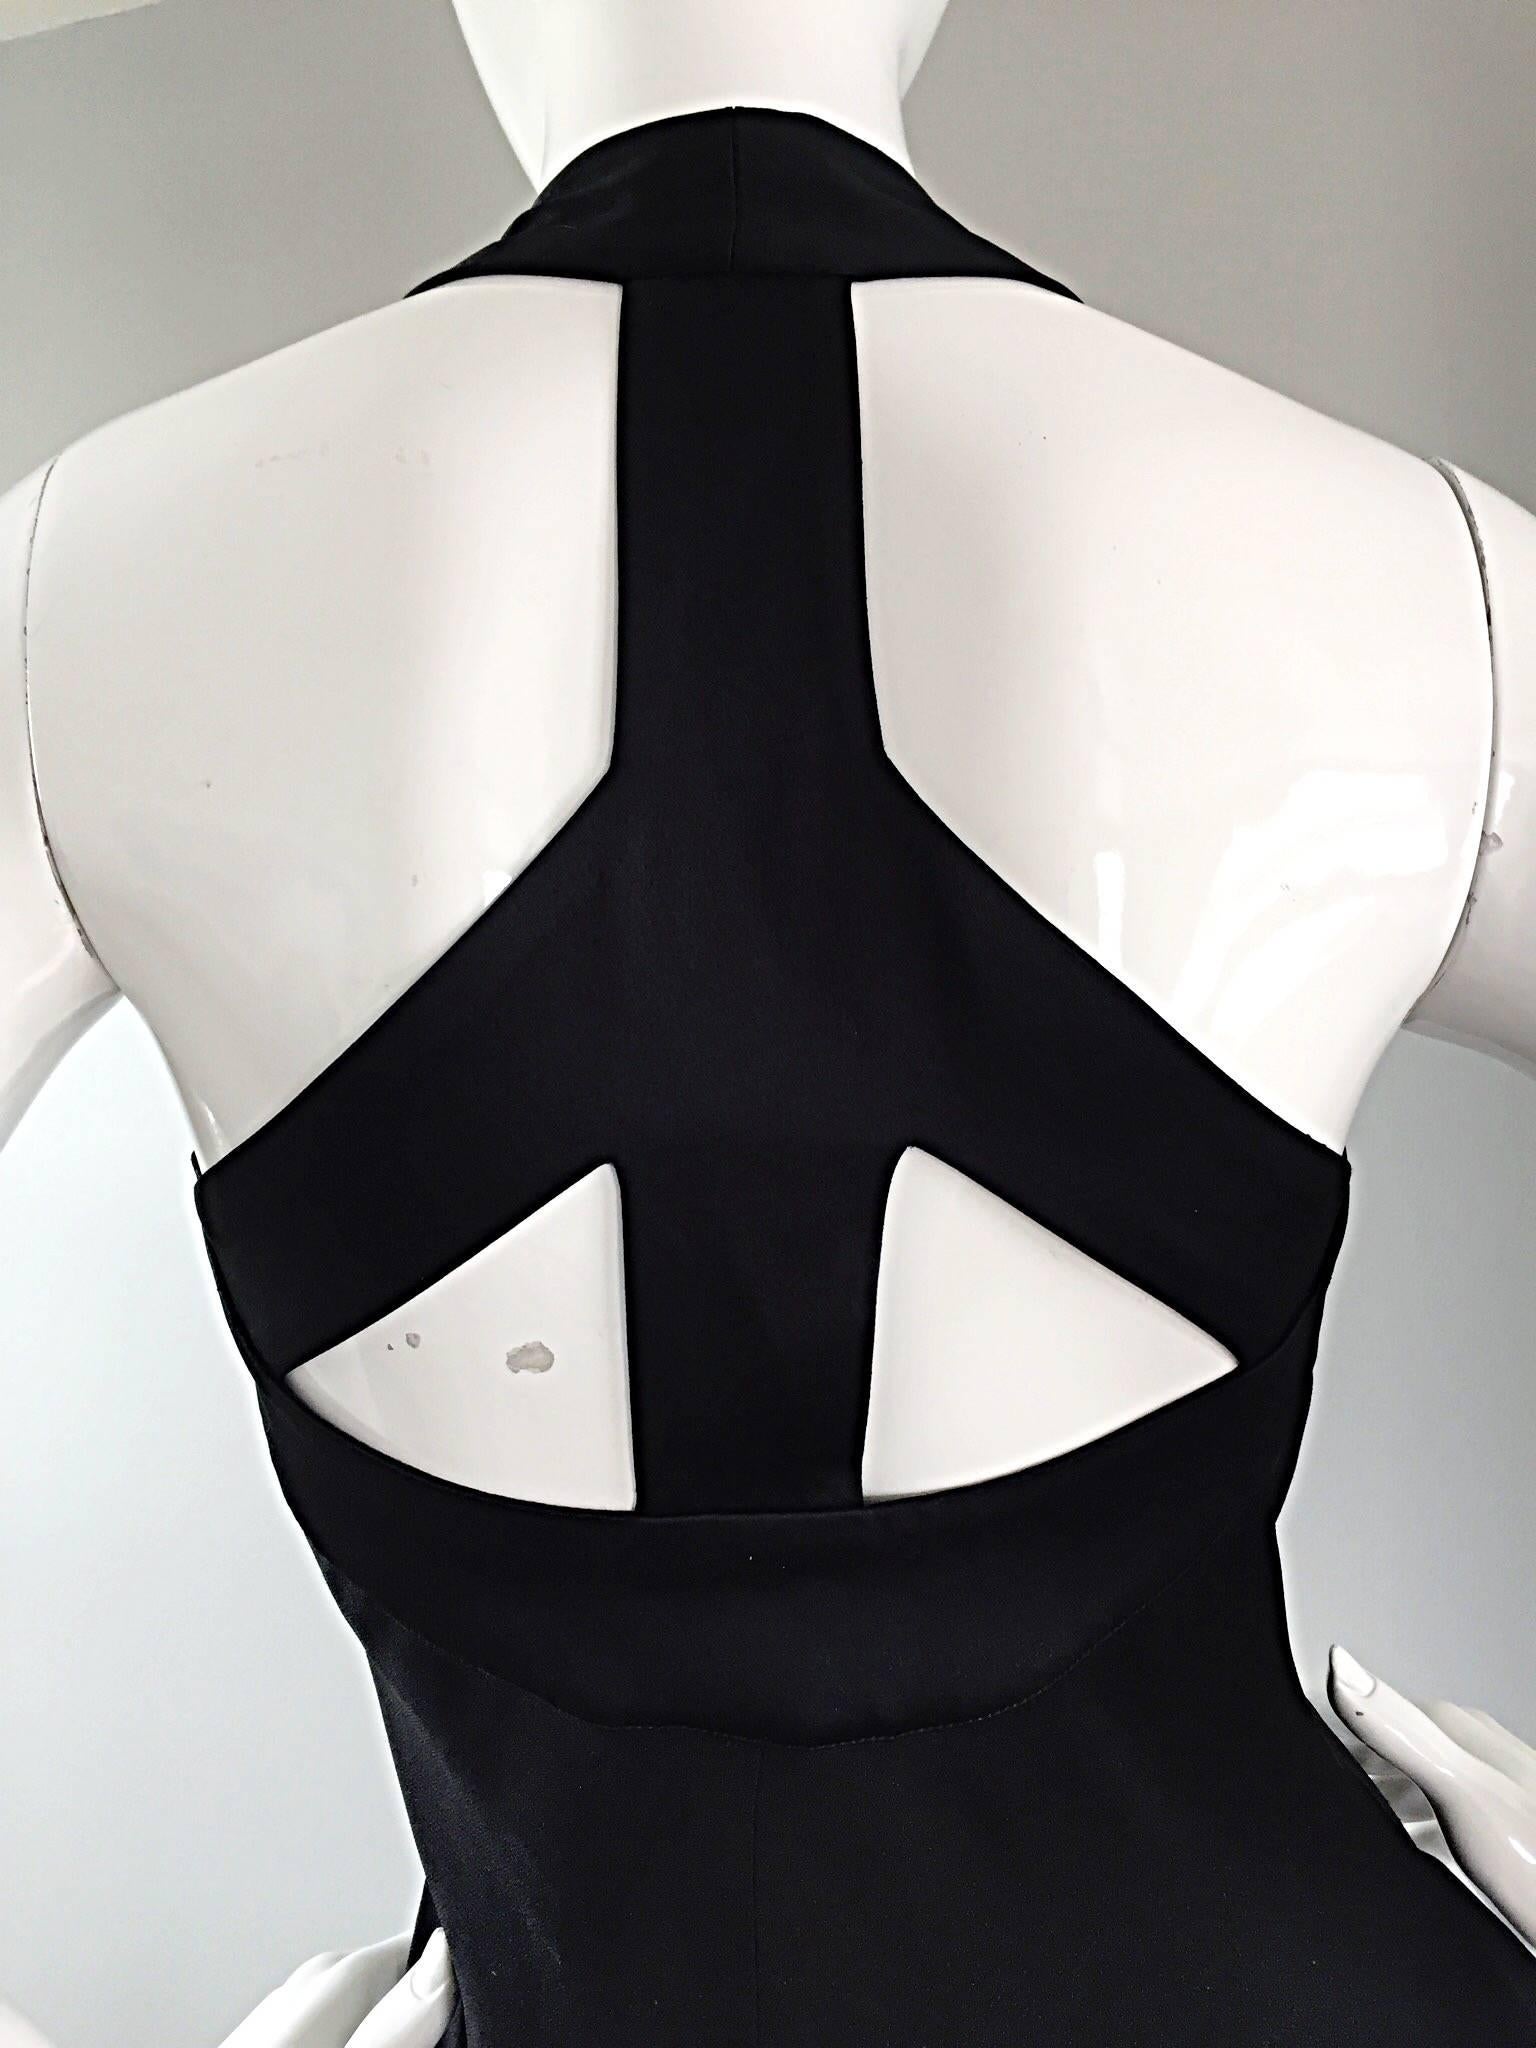 Moschino Cheap & Cheap Vintage 90s Iconic Peace Sign Cut Out Flirty Black Dress In Excellent Condition For Sale In San Diego, CA